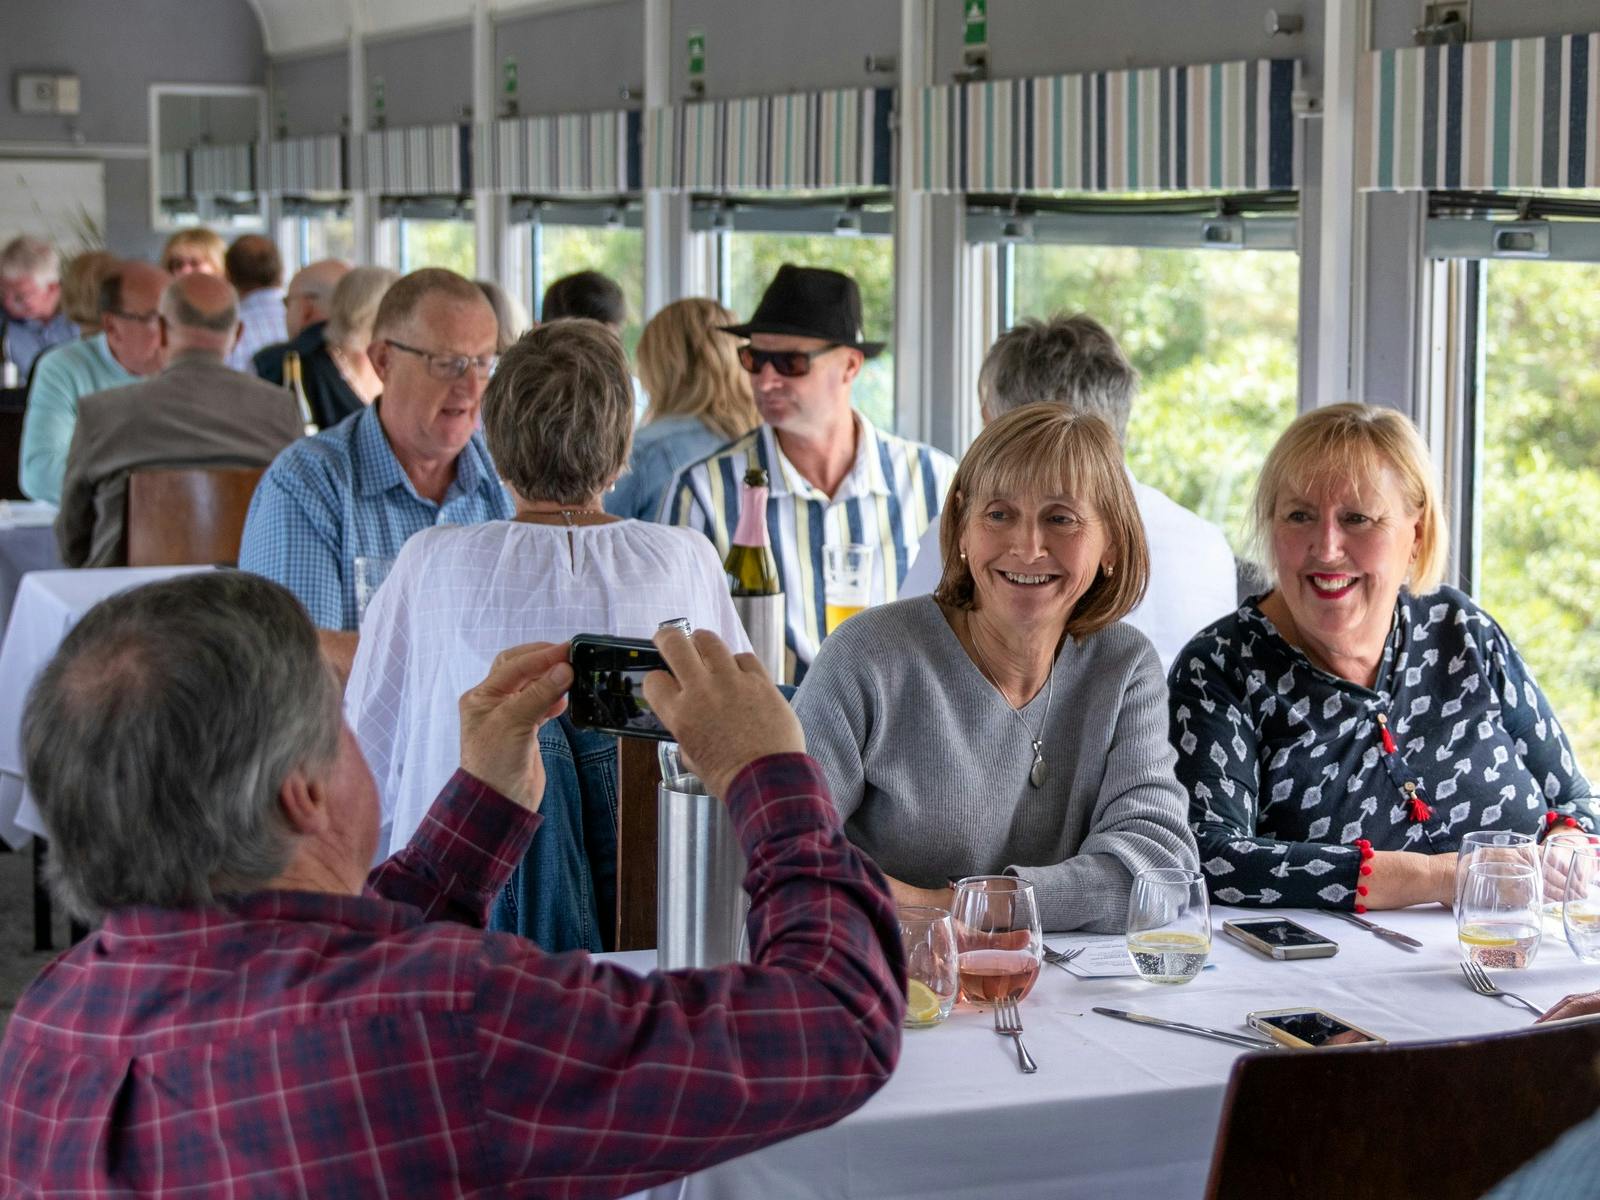 Inside a train carriage a man takes a photo of two women at a table